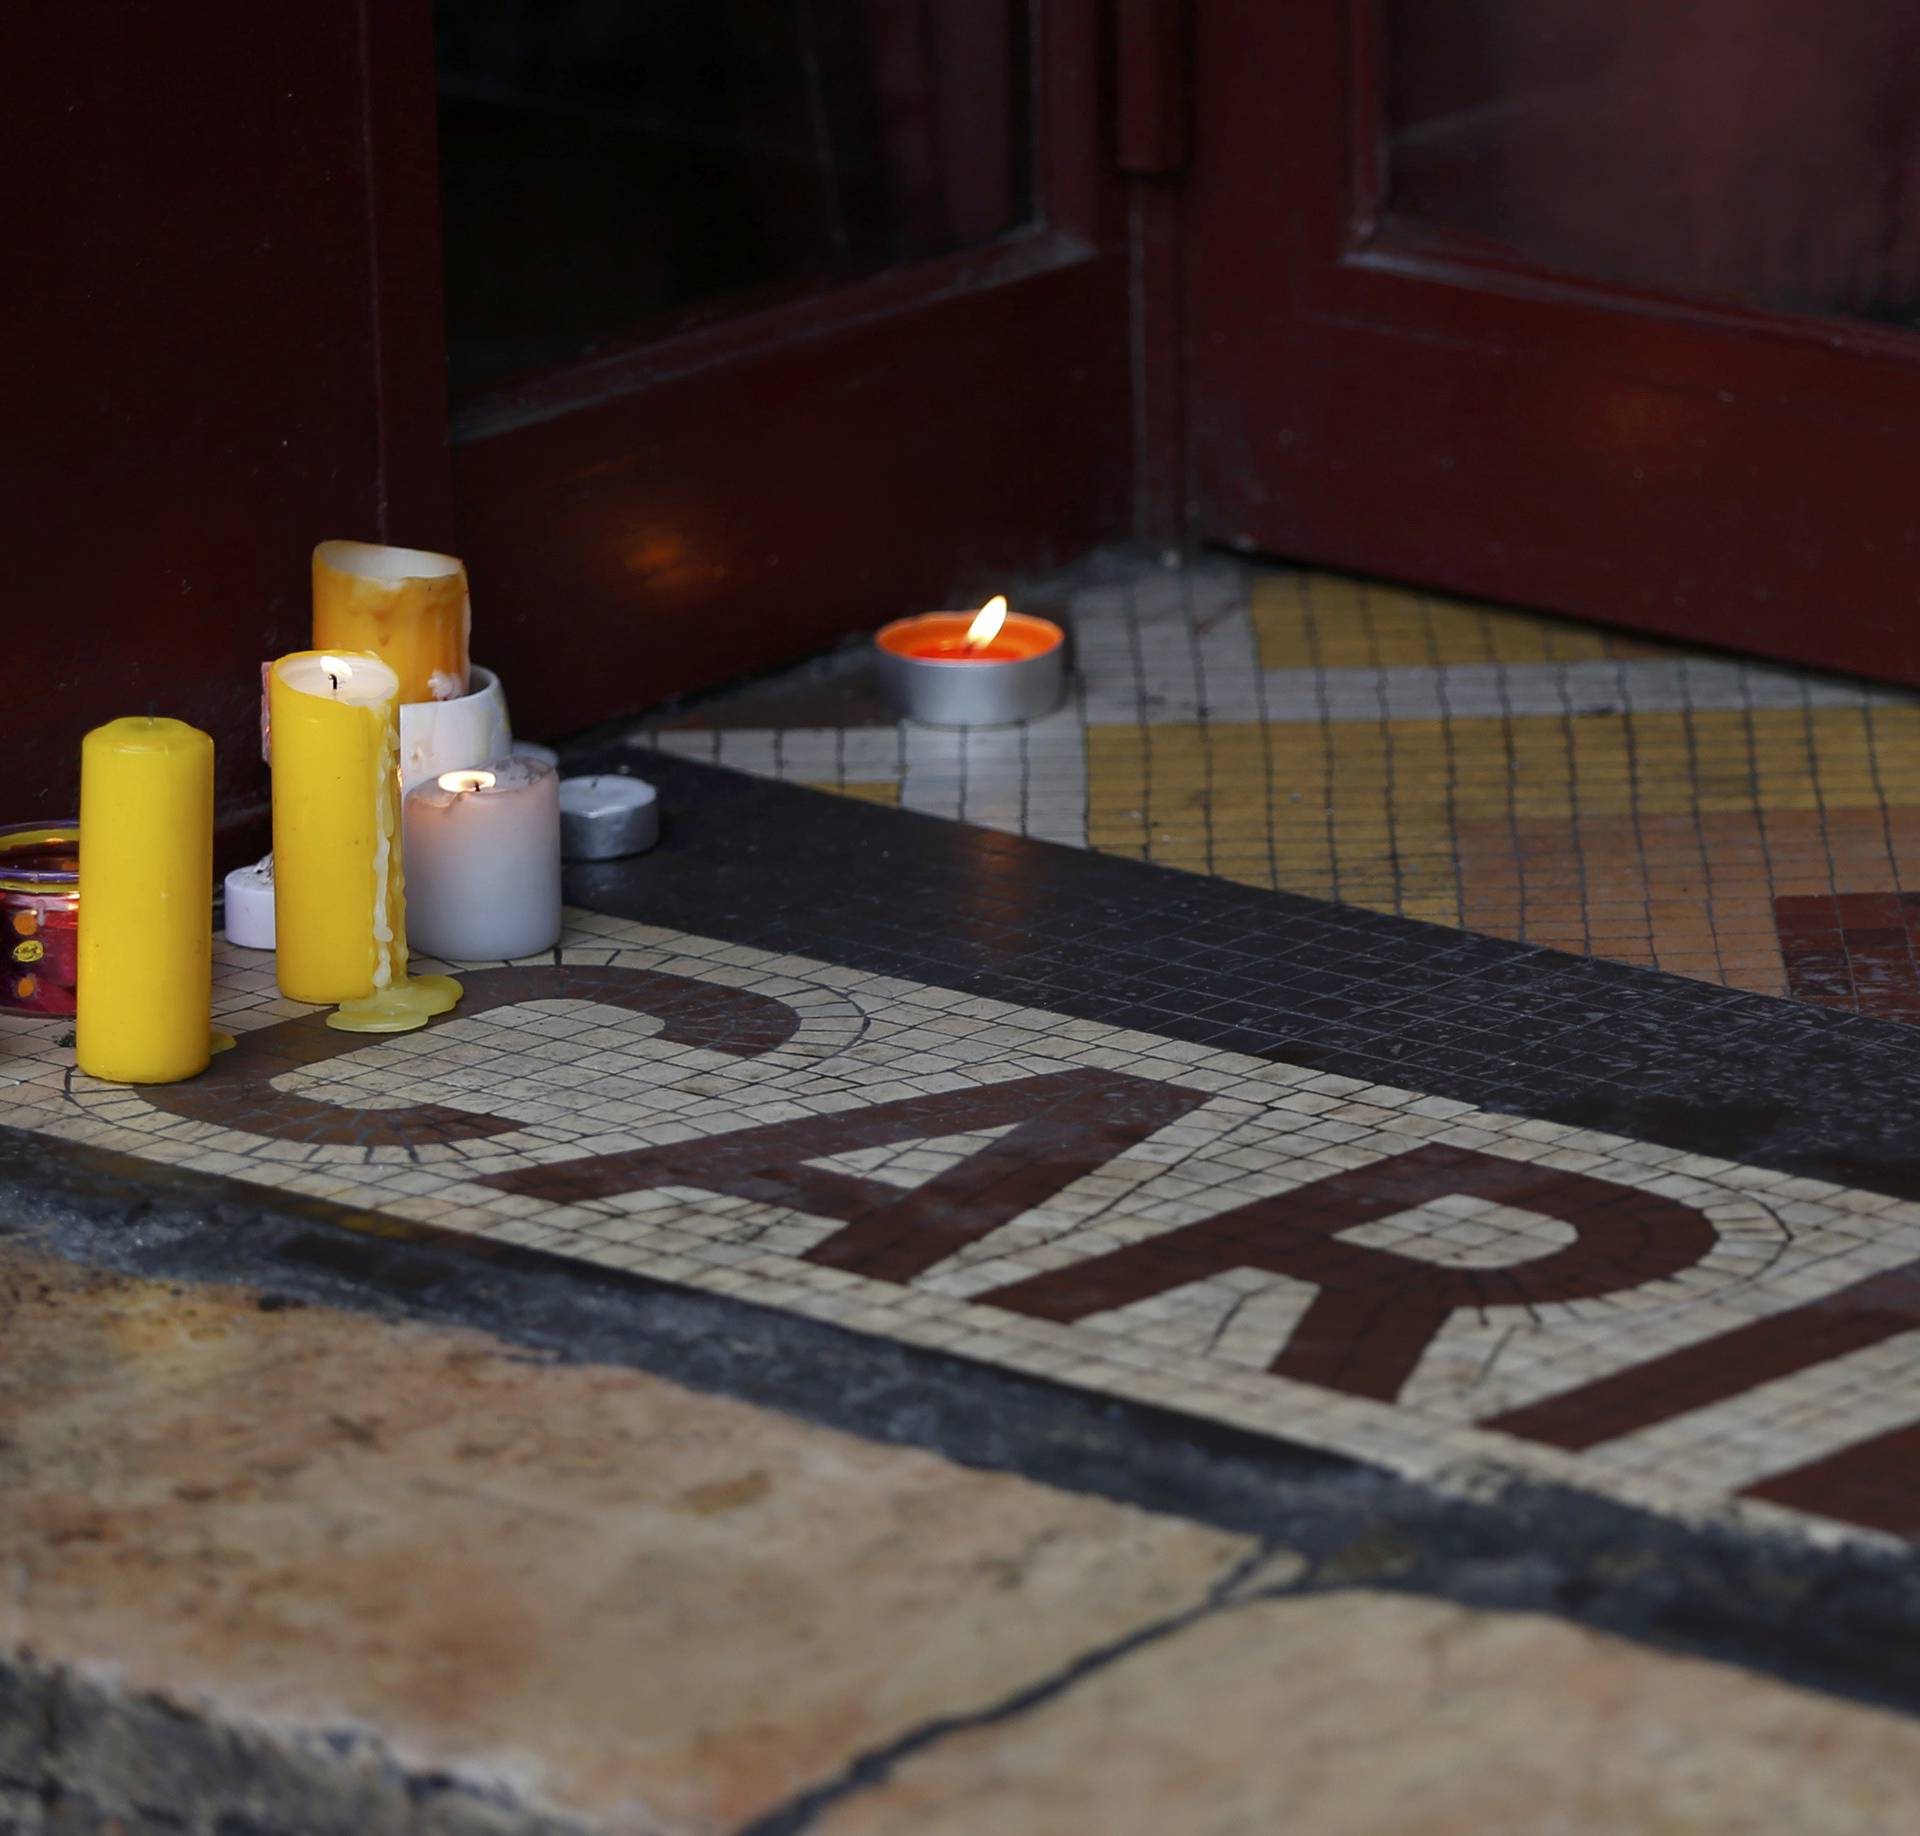 Candles are seen on the entrance of the "Le Carillon" bar and restaurant in Paris